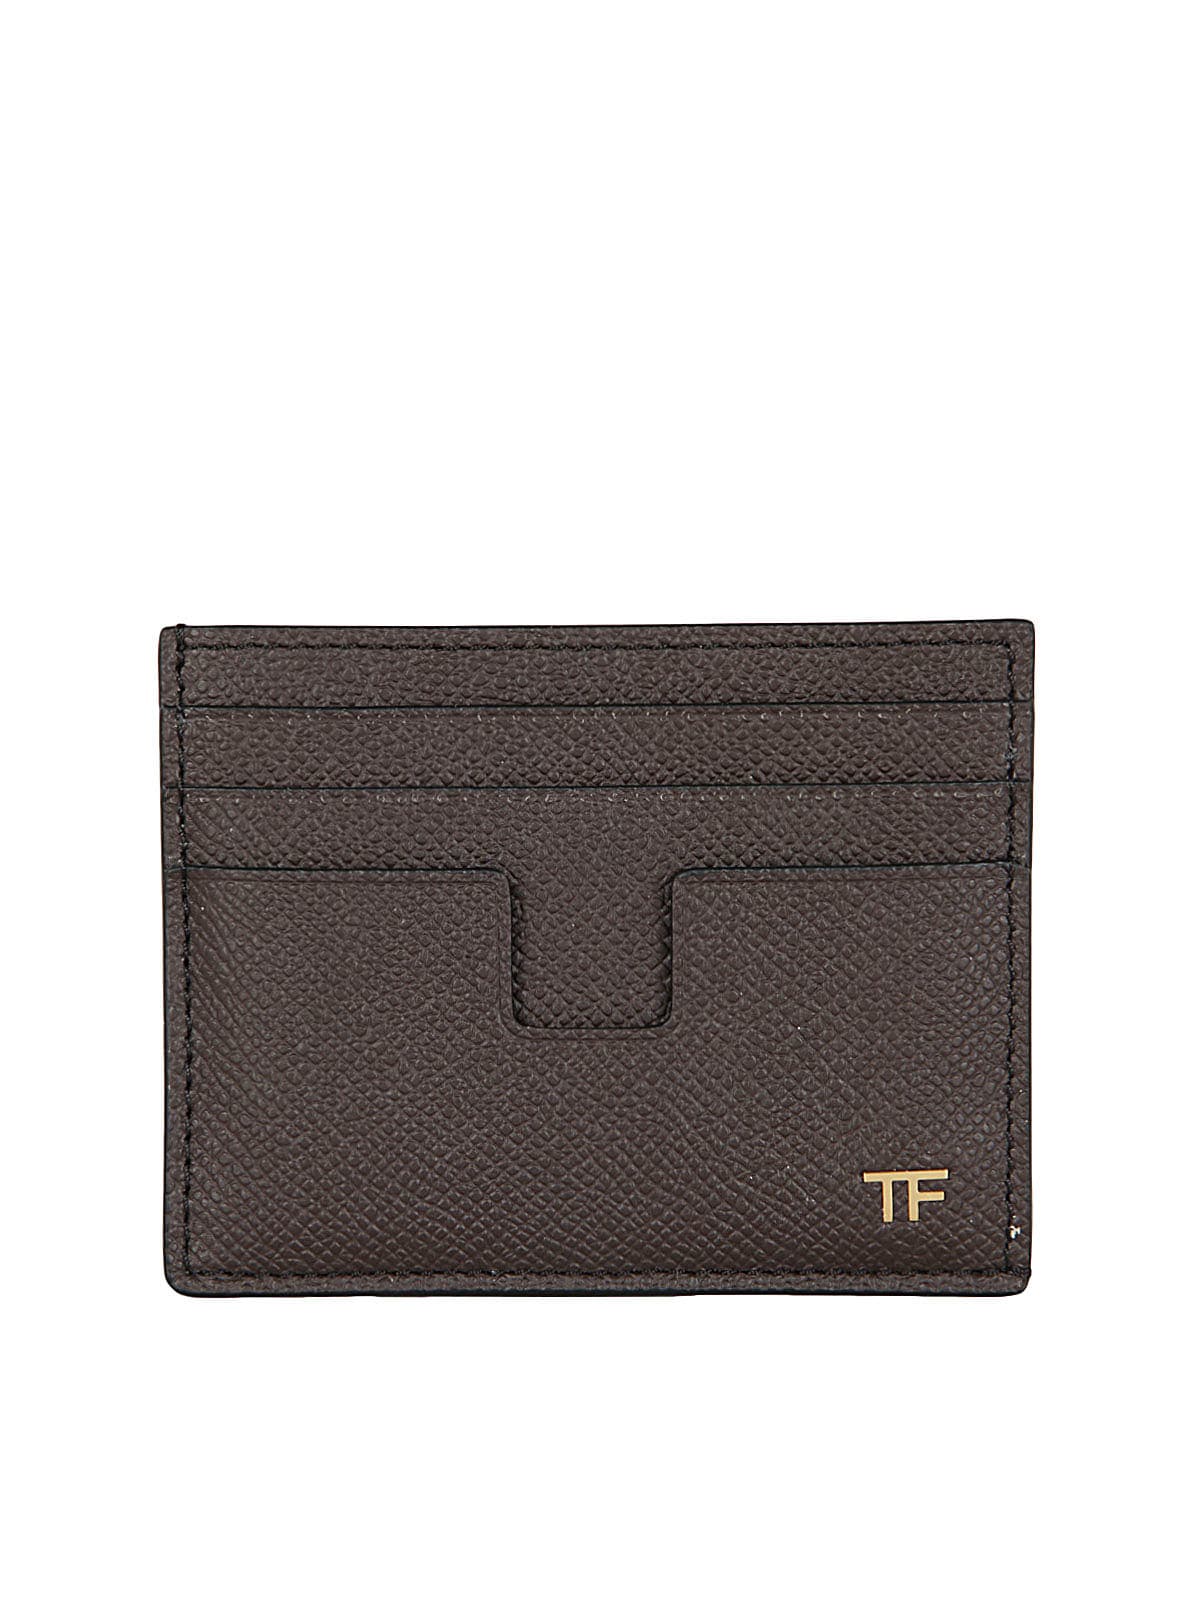 Tom Ford Credit Card Cases